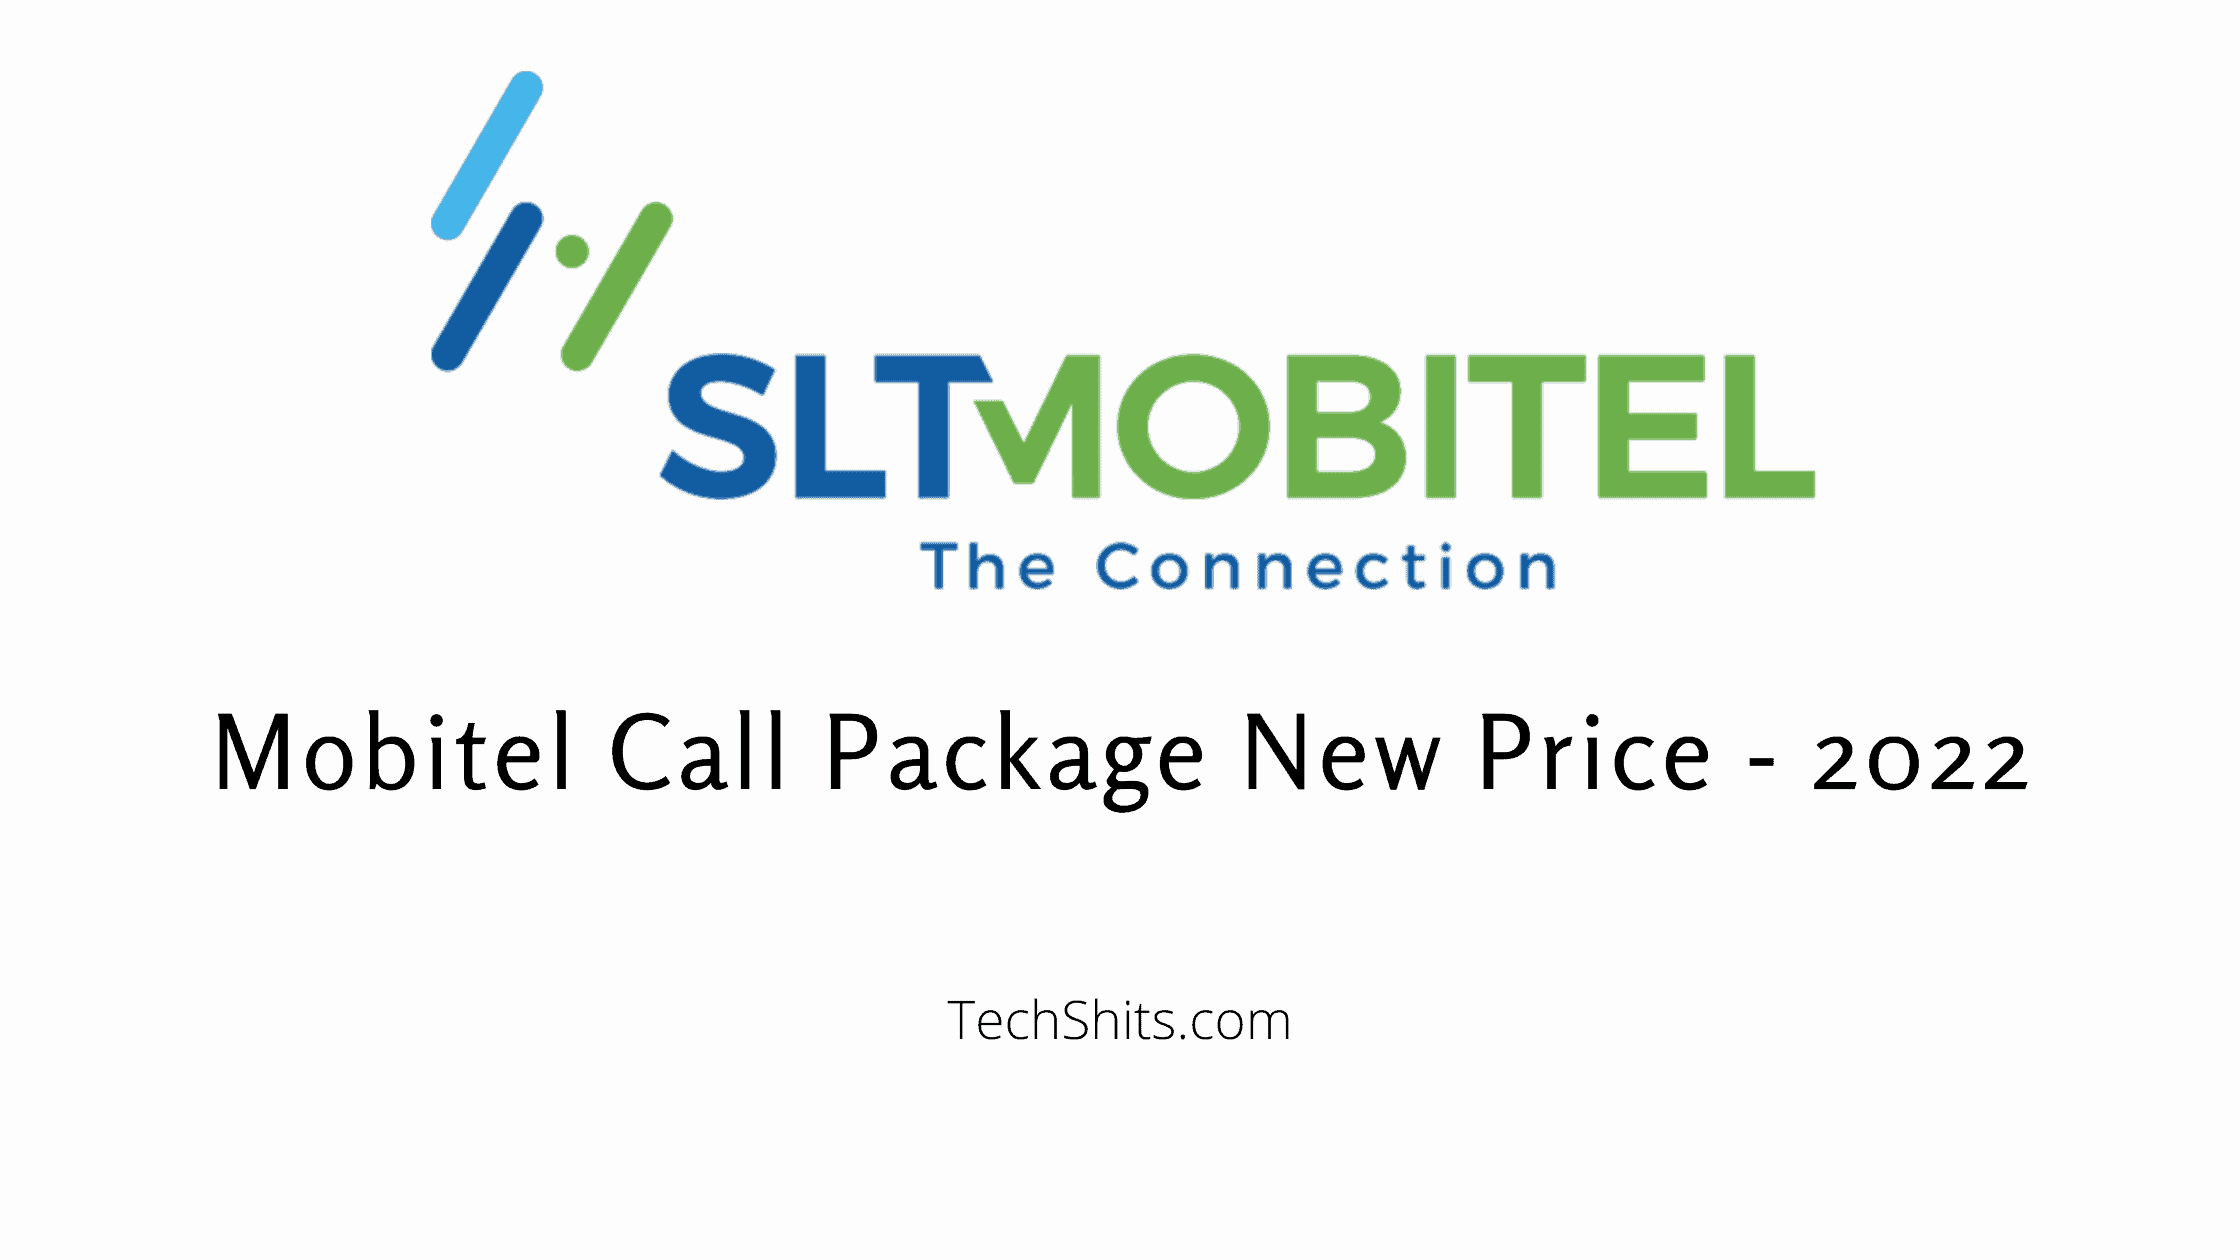 Mobitel Call Package New Price - 2022